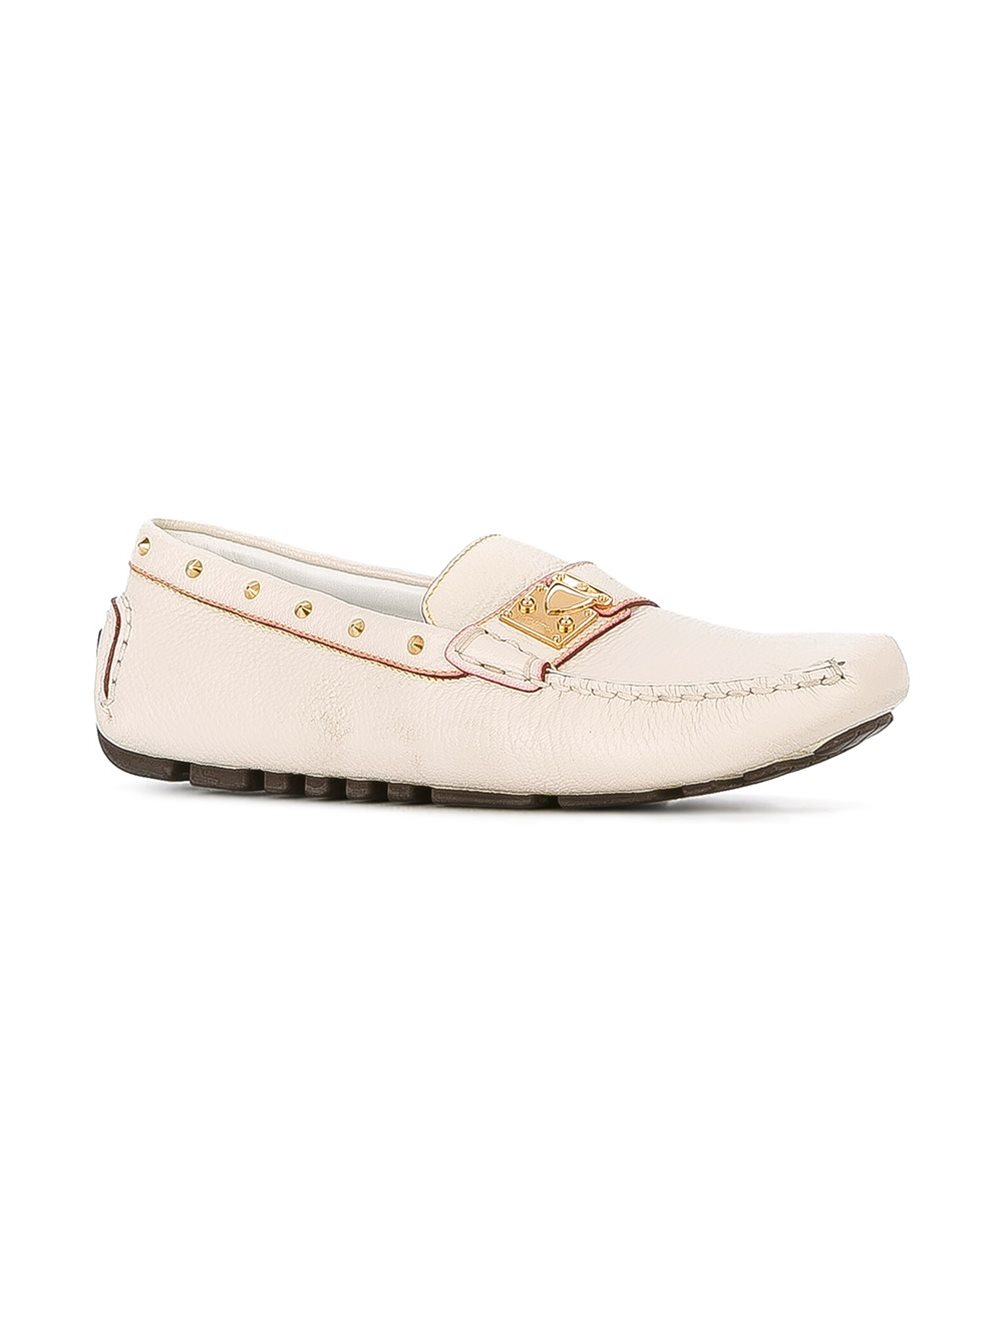 Lyst - Louis vuitton Studded Loafers in White